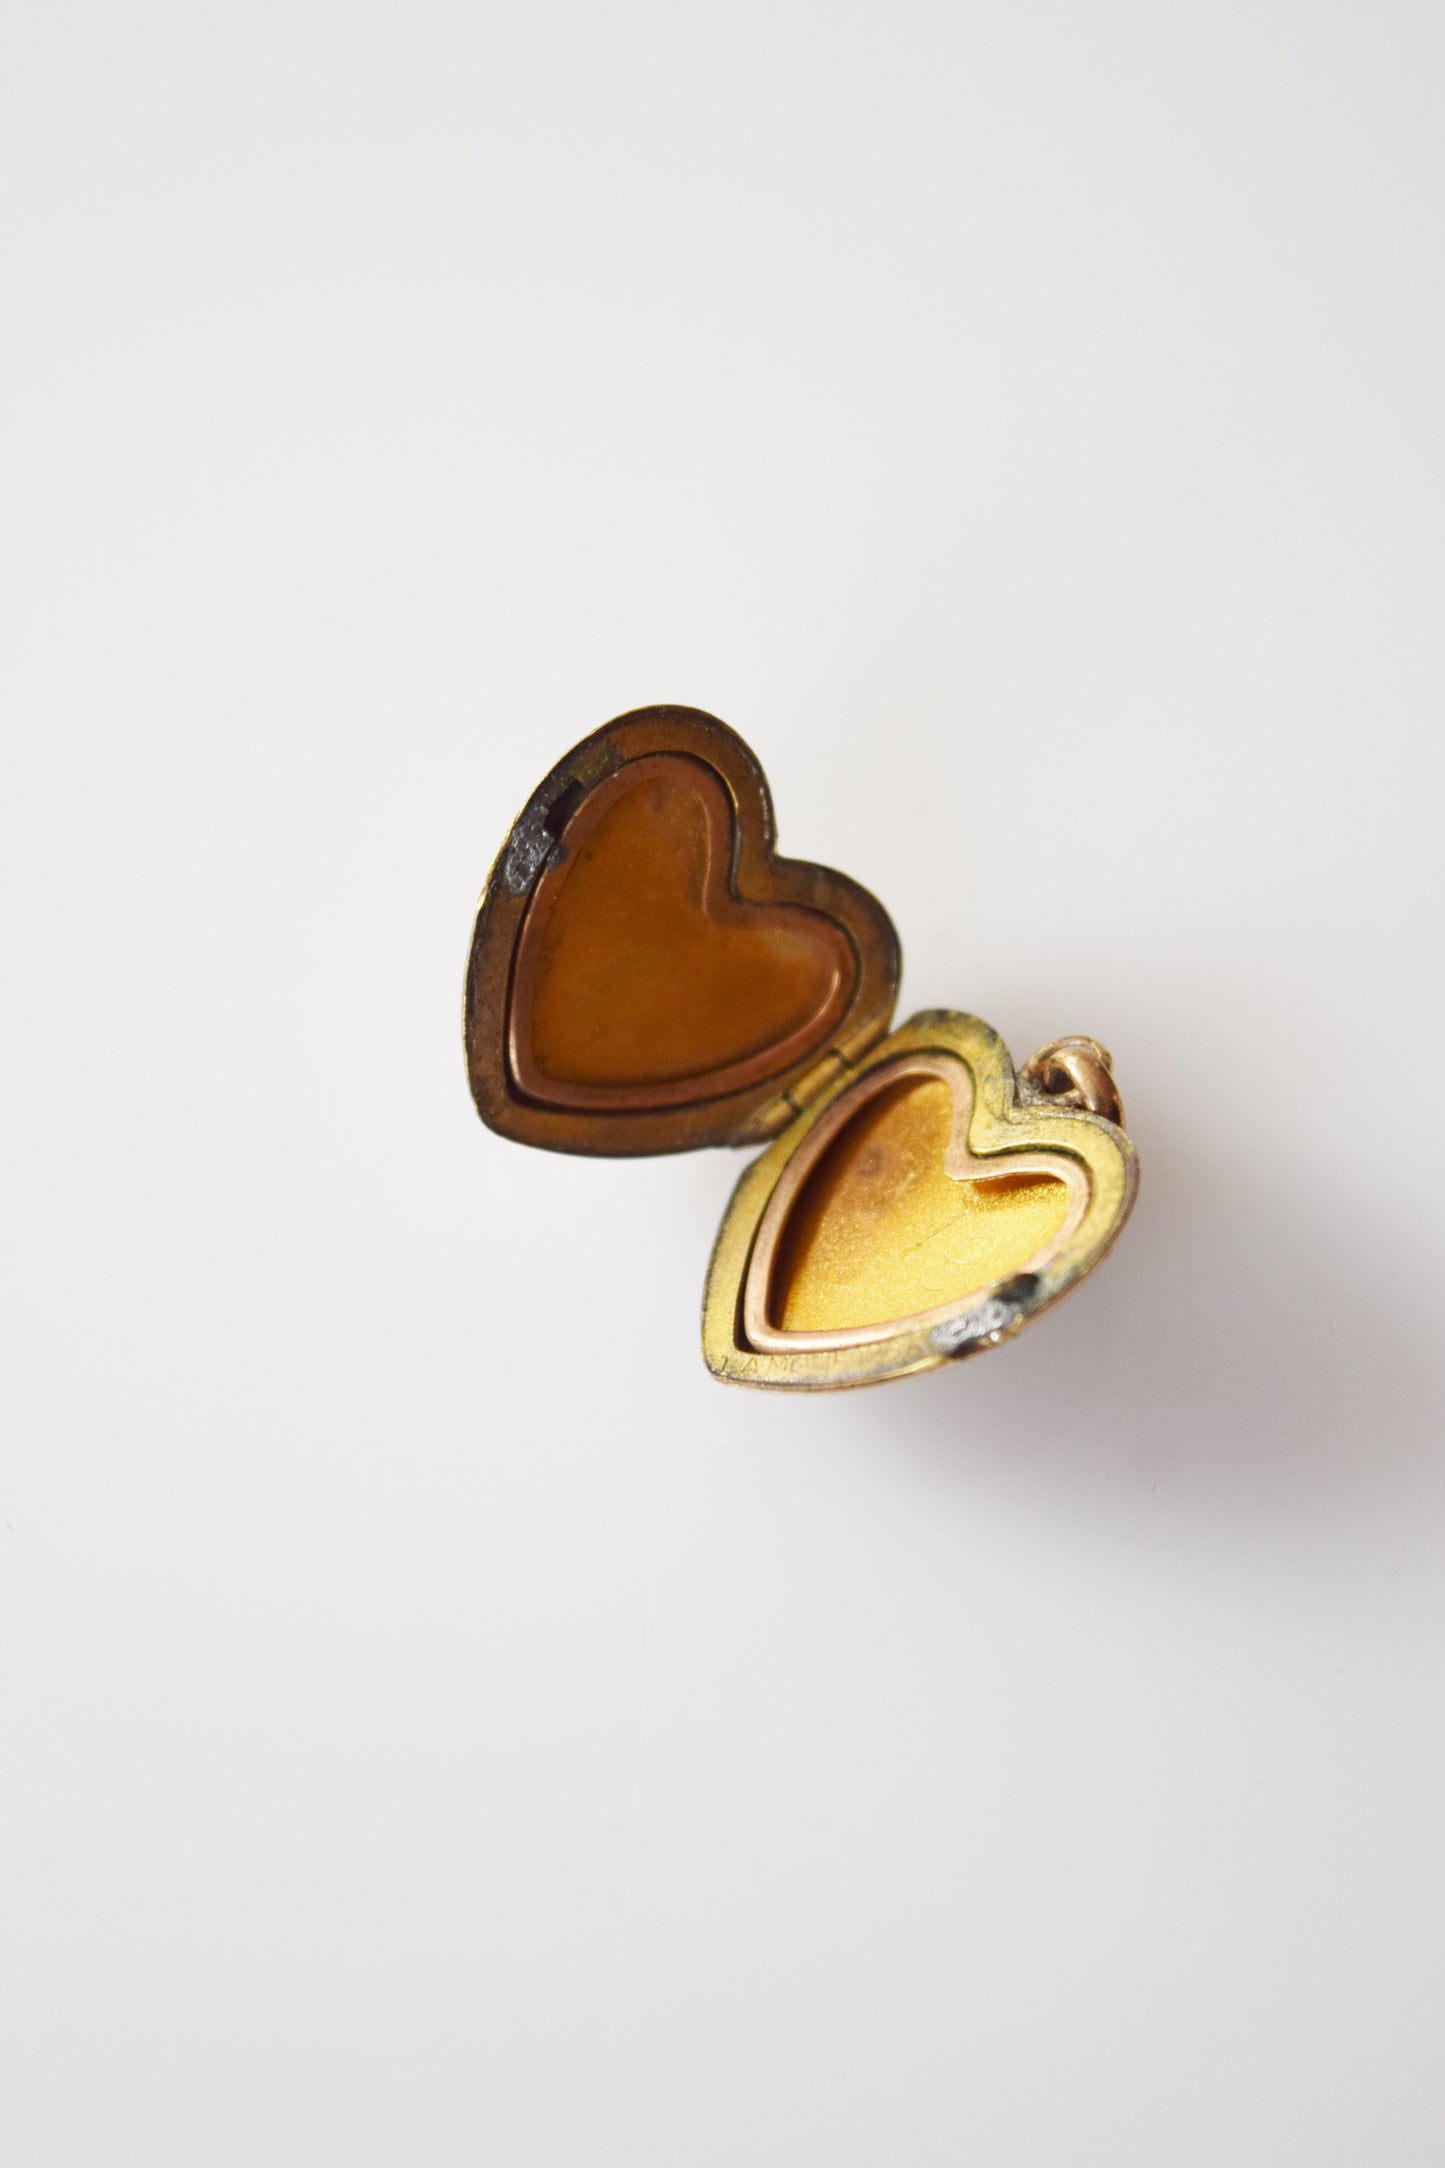 Antique Gold Fill Heart Locket | Scrolled Engraving